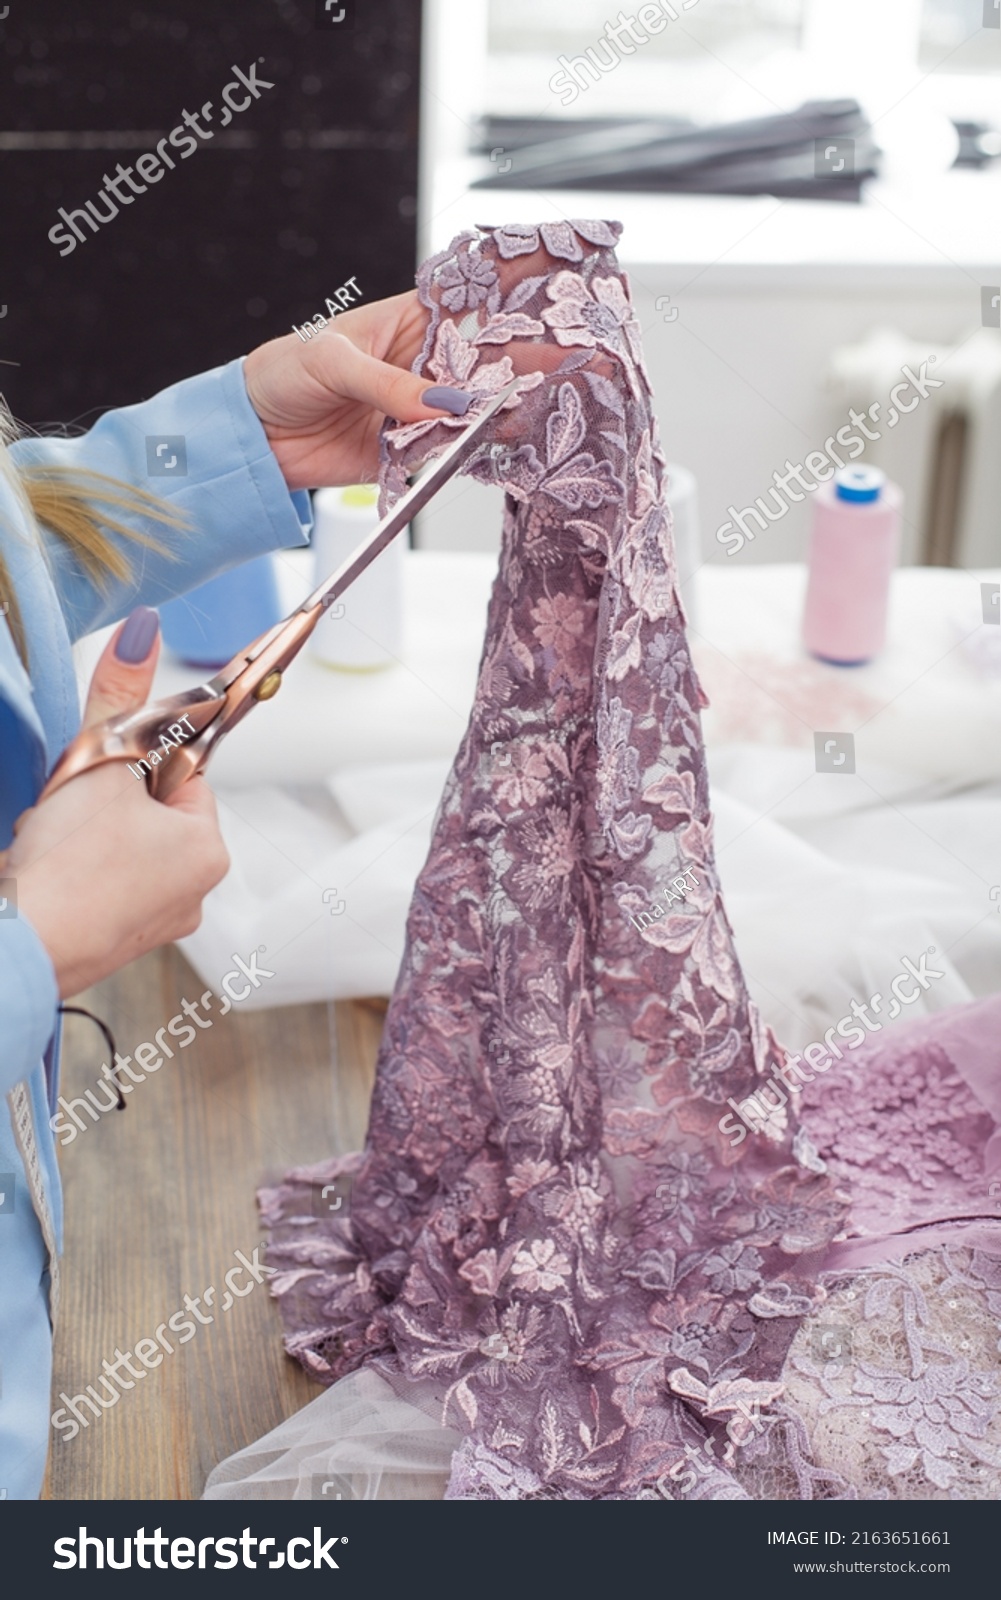 Tailor making a wedding dress with different lace and silk fabrics. Using scissors to cut purple lace. Working at her workshop. Cropped studio faceless portrait of Seamstress designer at workplace. #2163651661